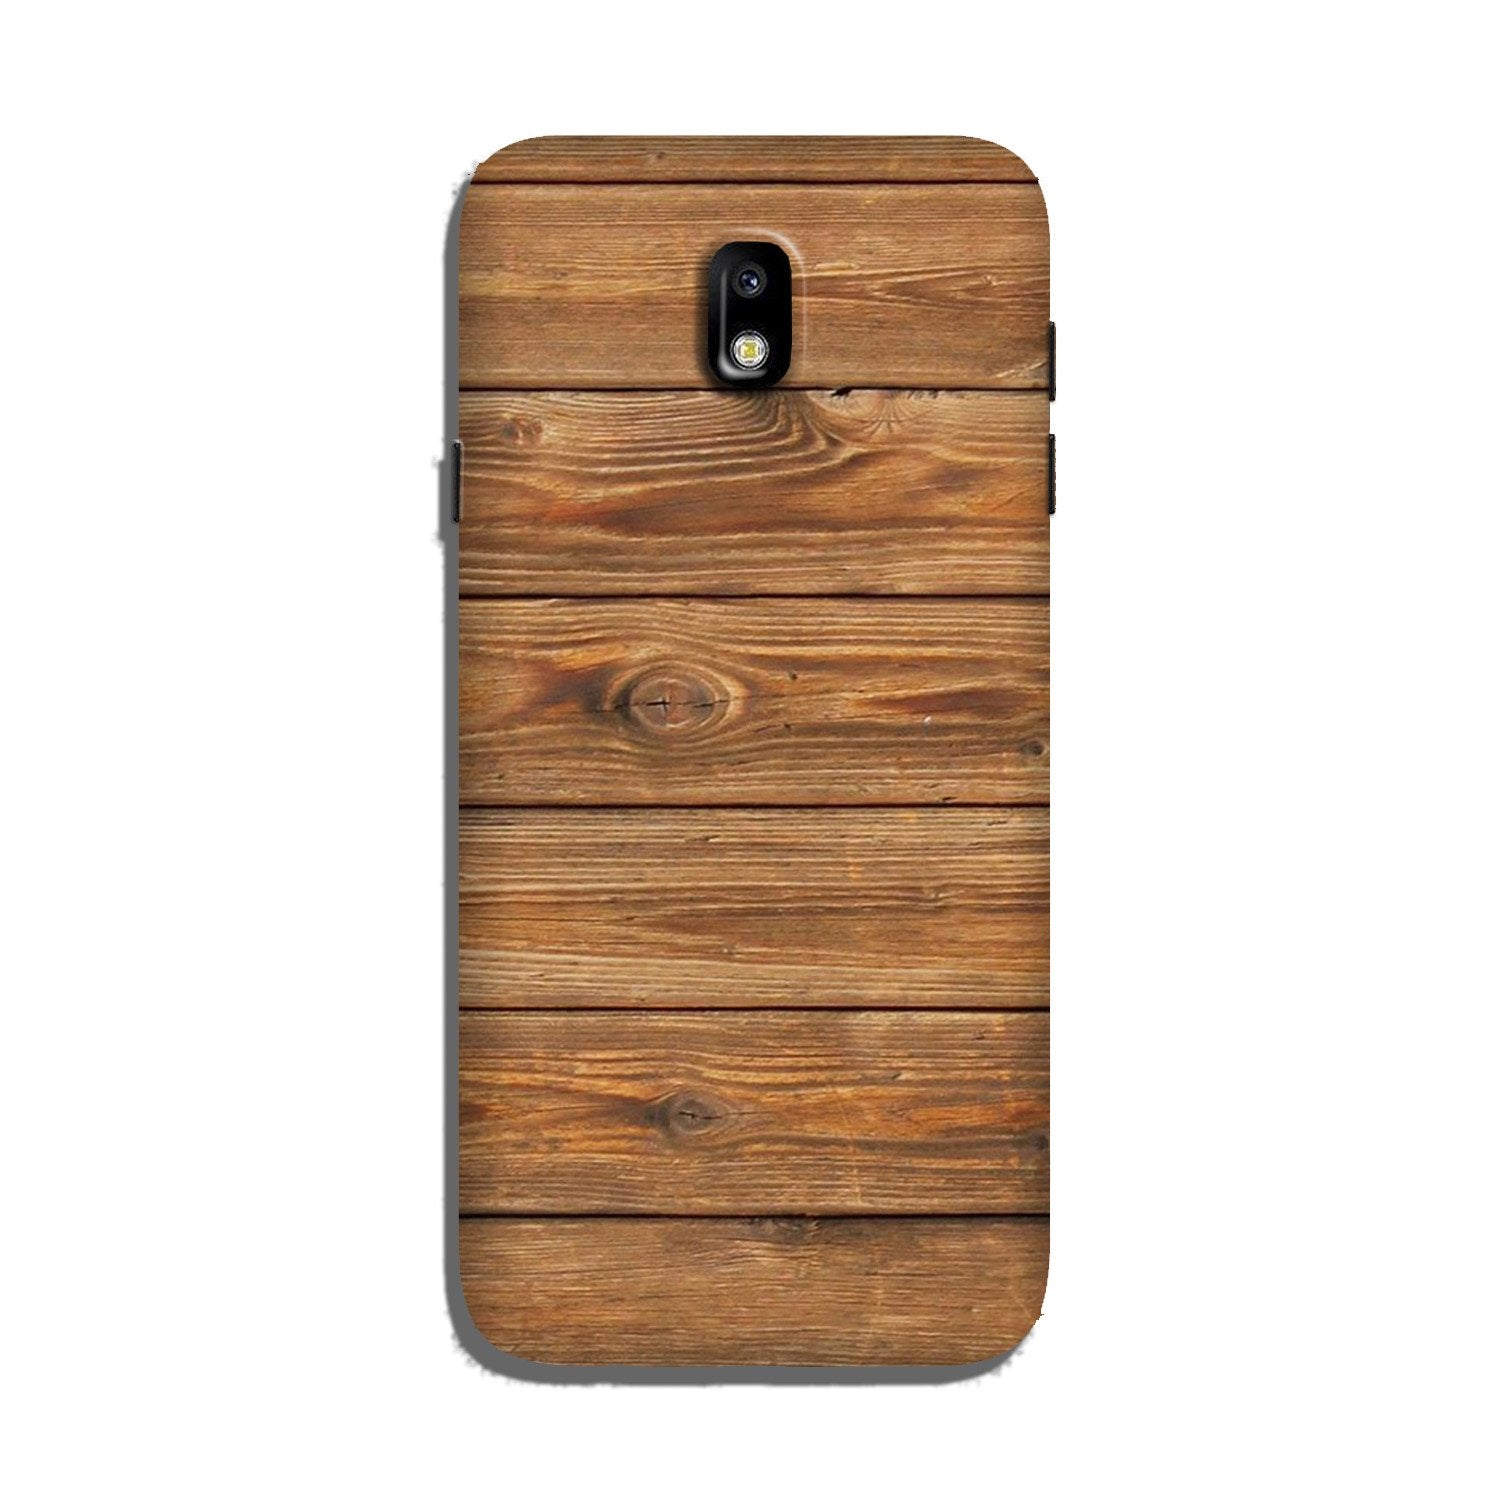 Wooden Look Case for Galaxy J3 Pro(Design - 113)